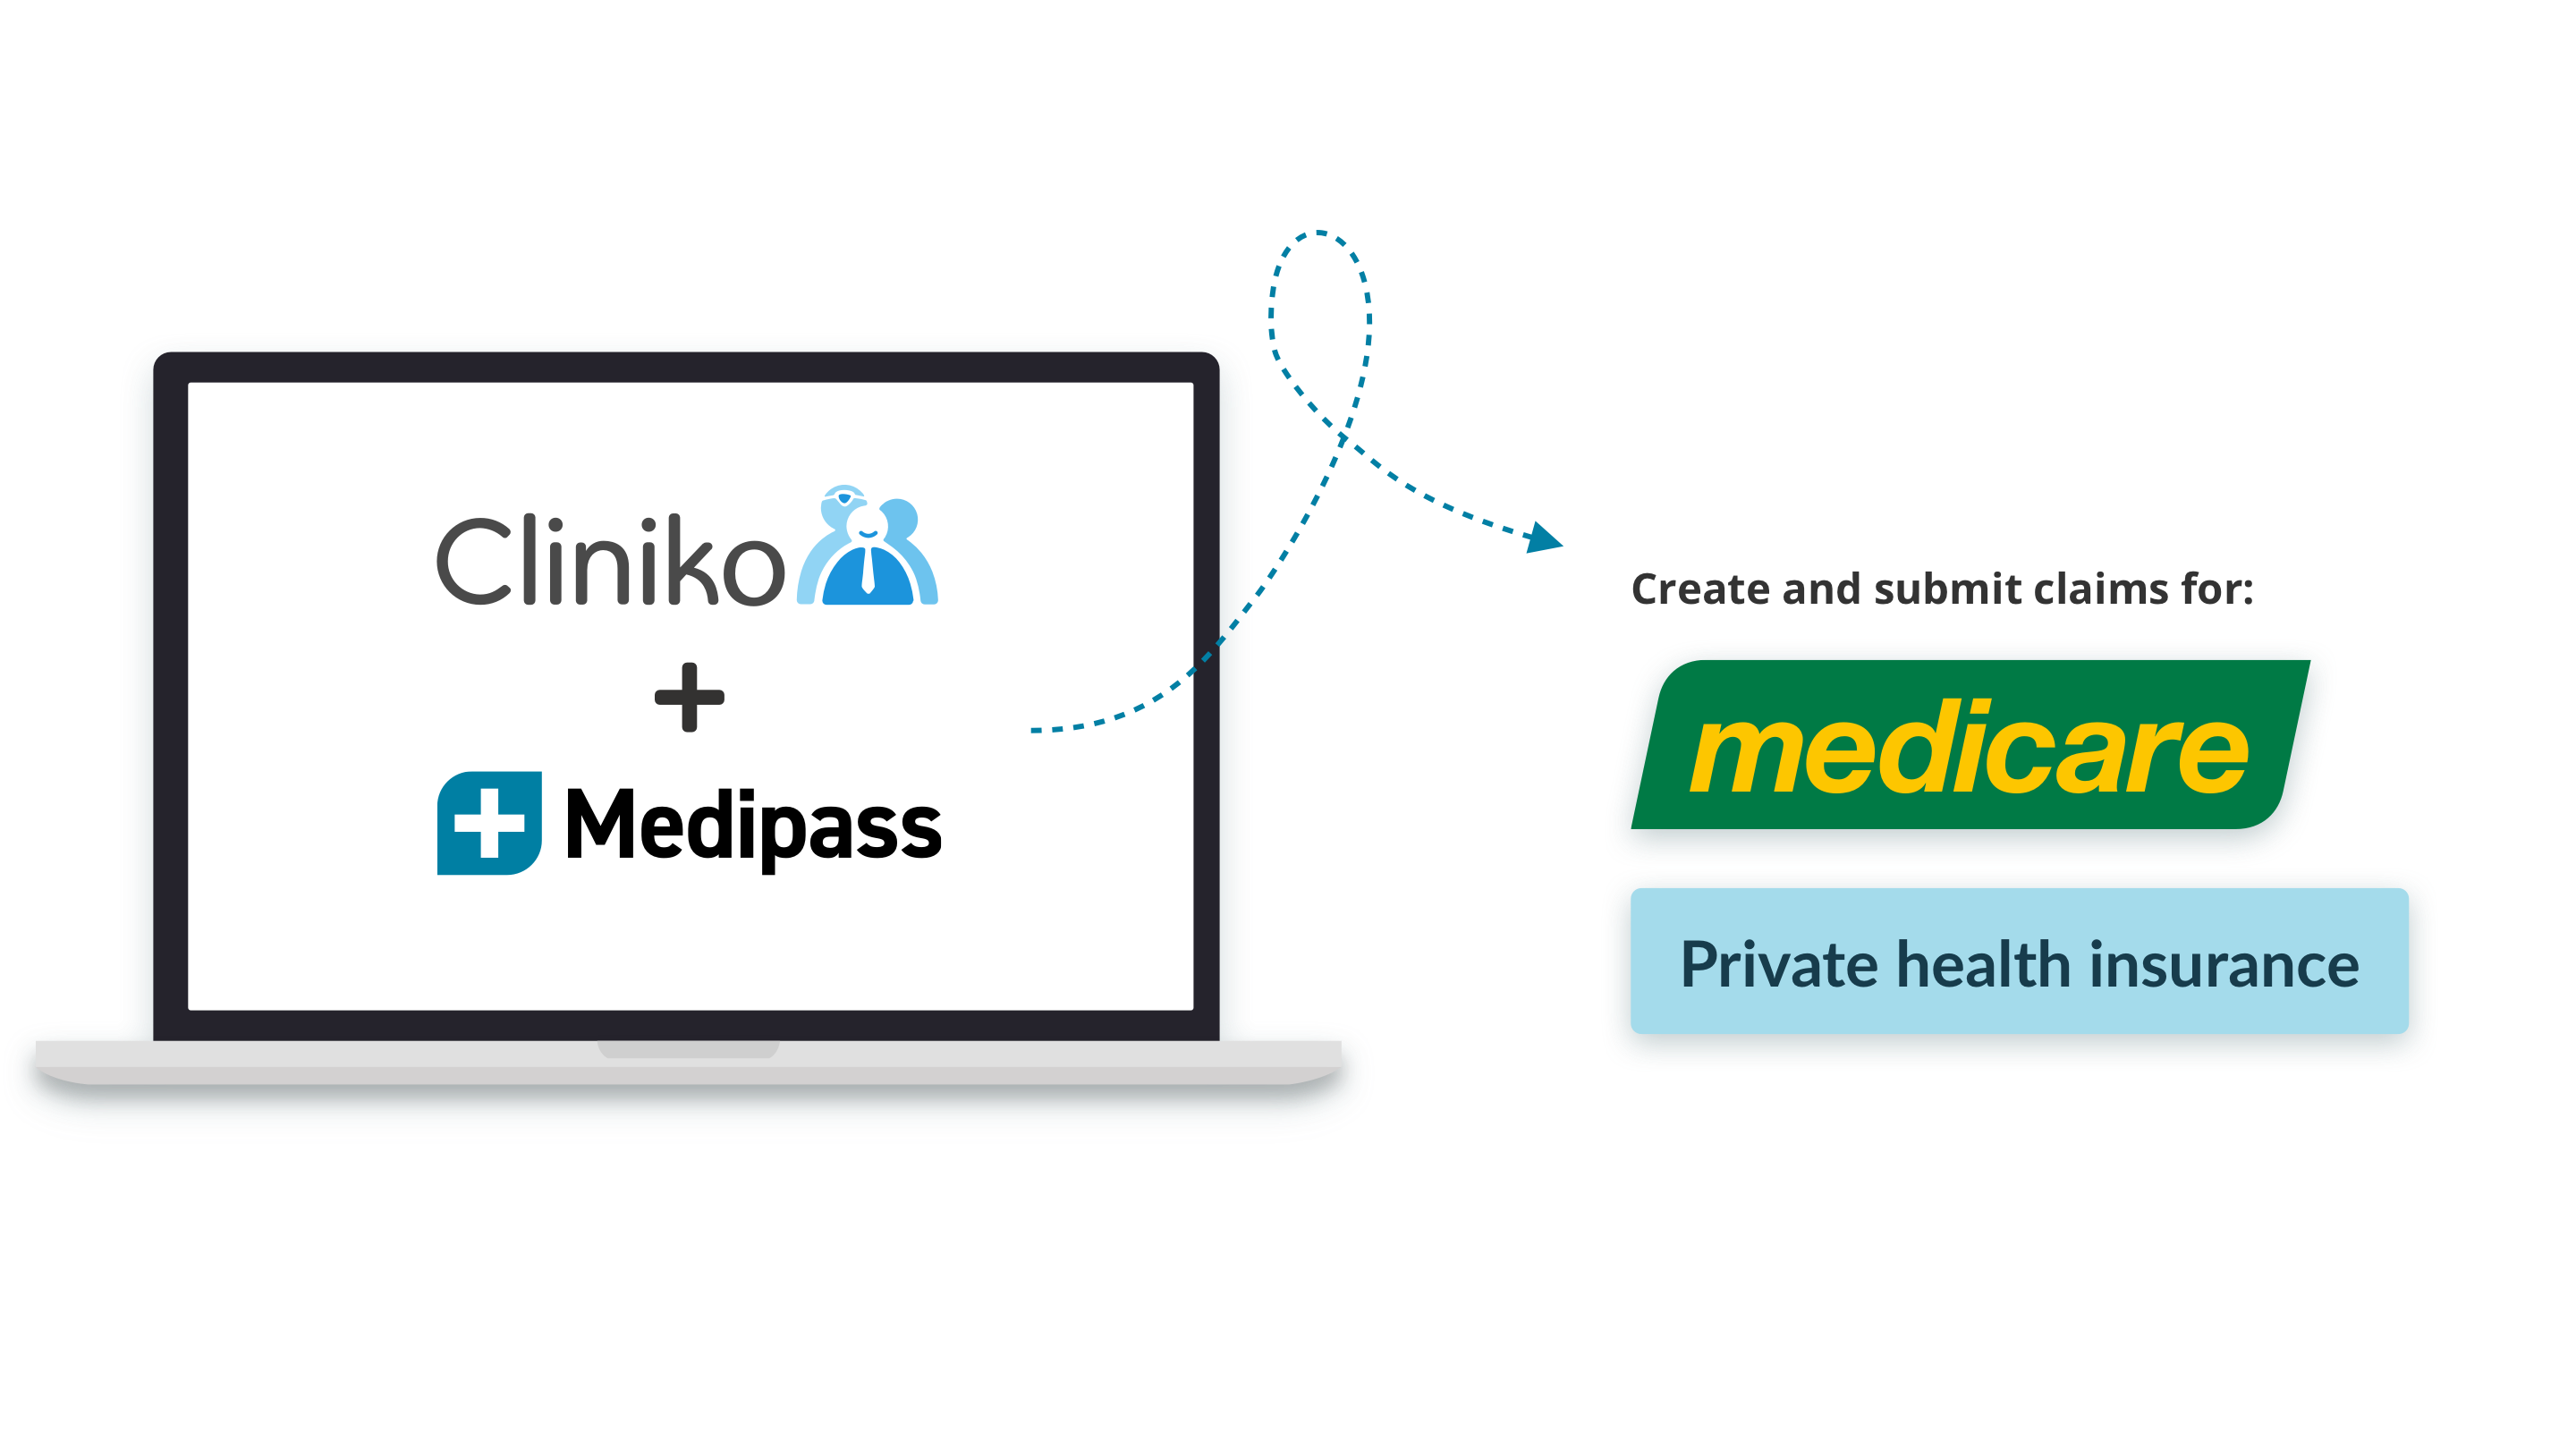 Cliniko and Medipass allow you to create and subi